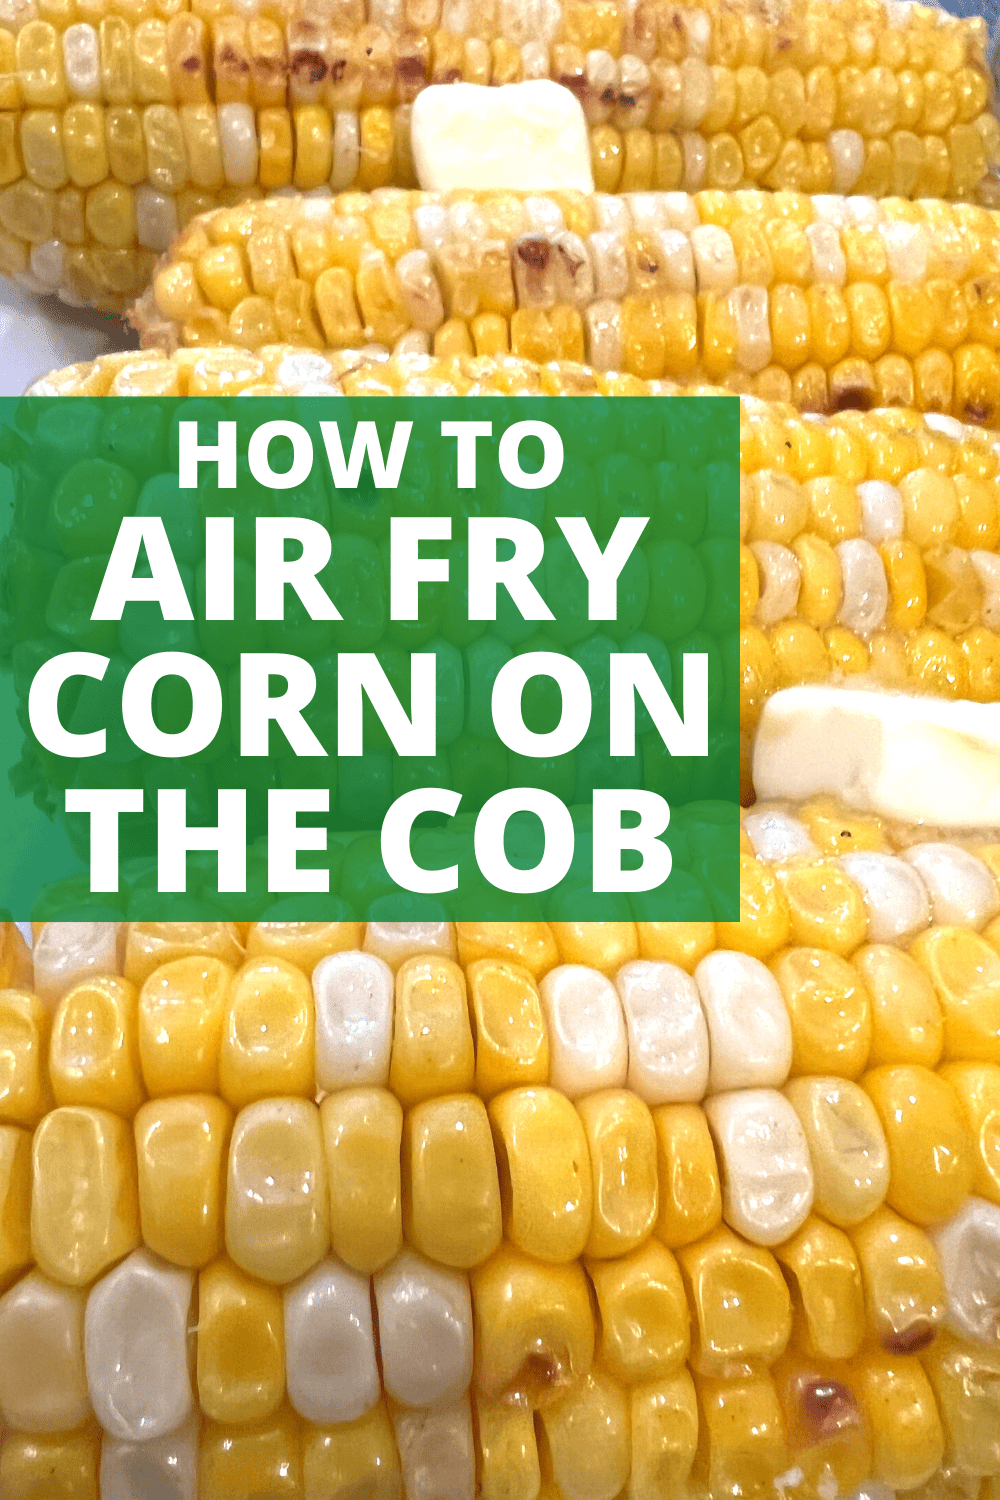 AIR FRYER CORN ON THE COB HOW TO AIR FRY CORN (No Grill Grilled Corn: Air Fryer Corn Recipe)